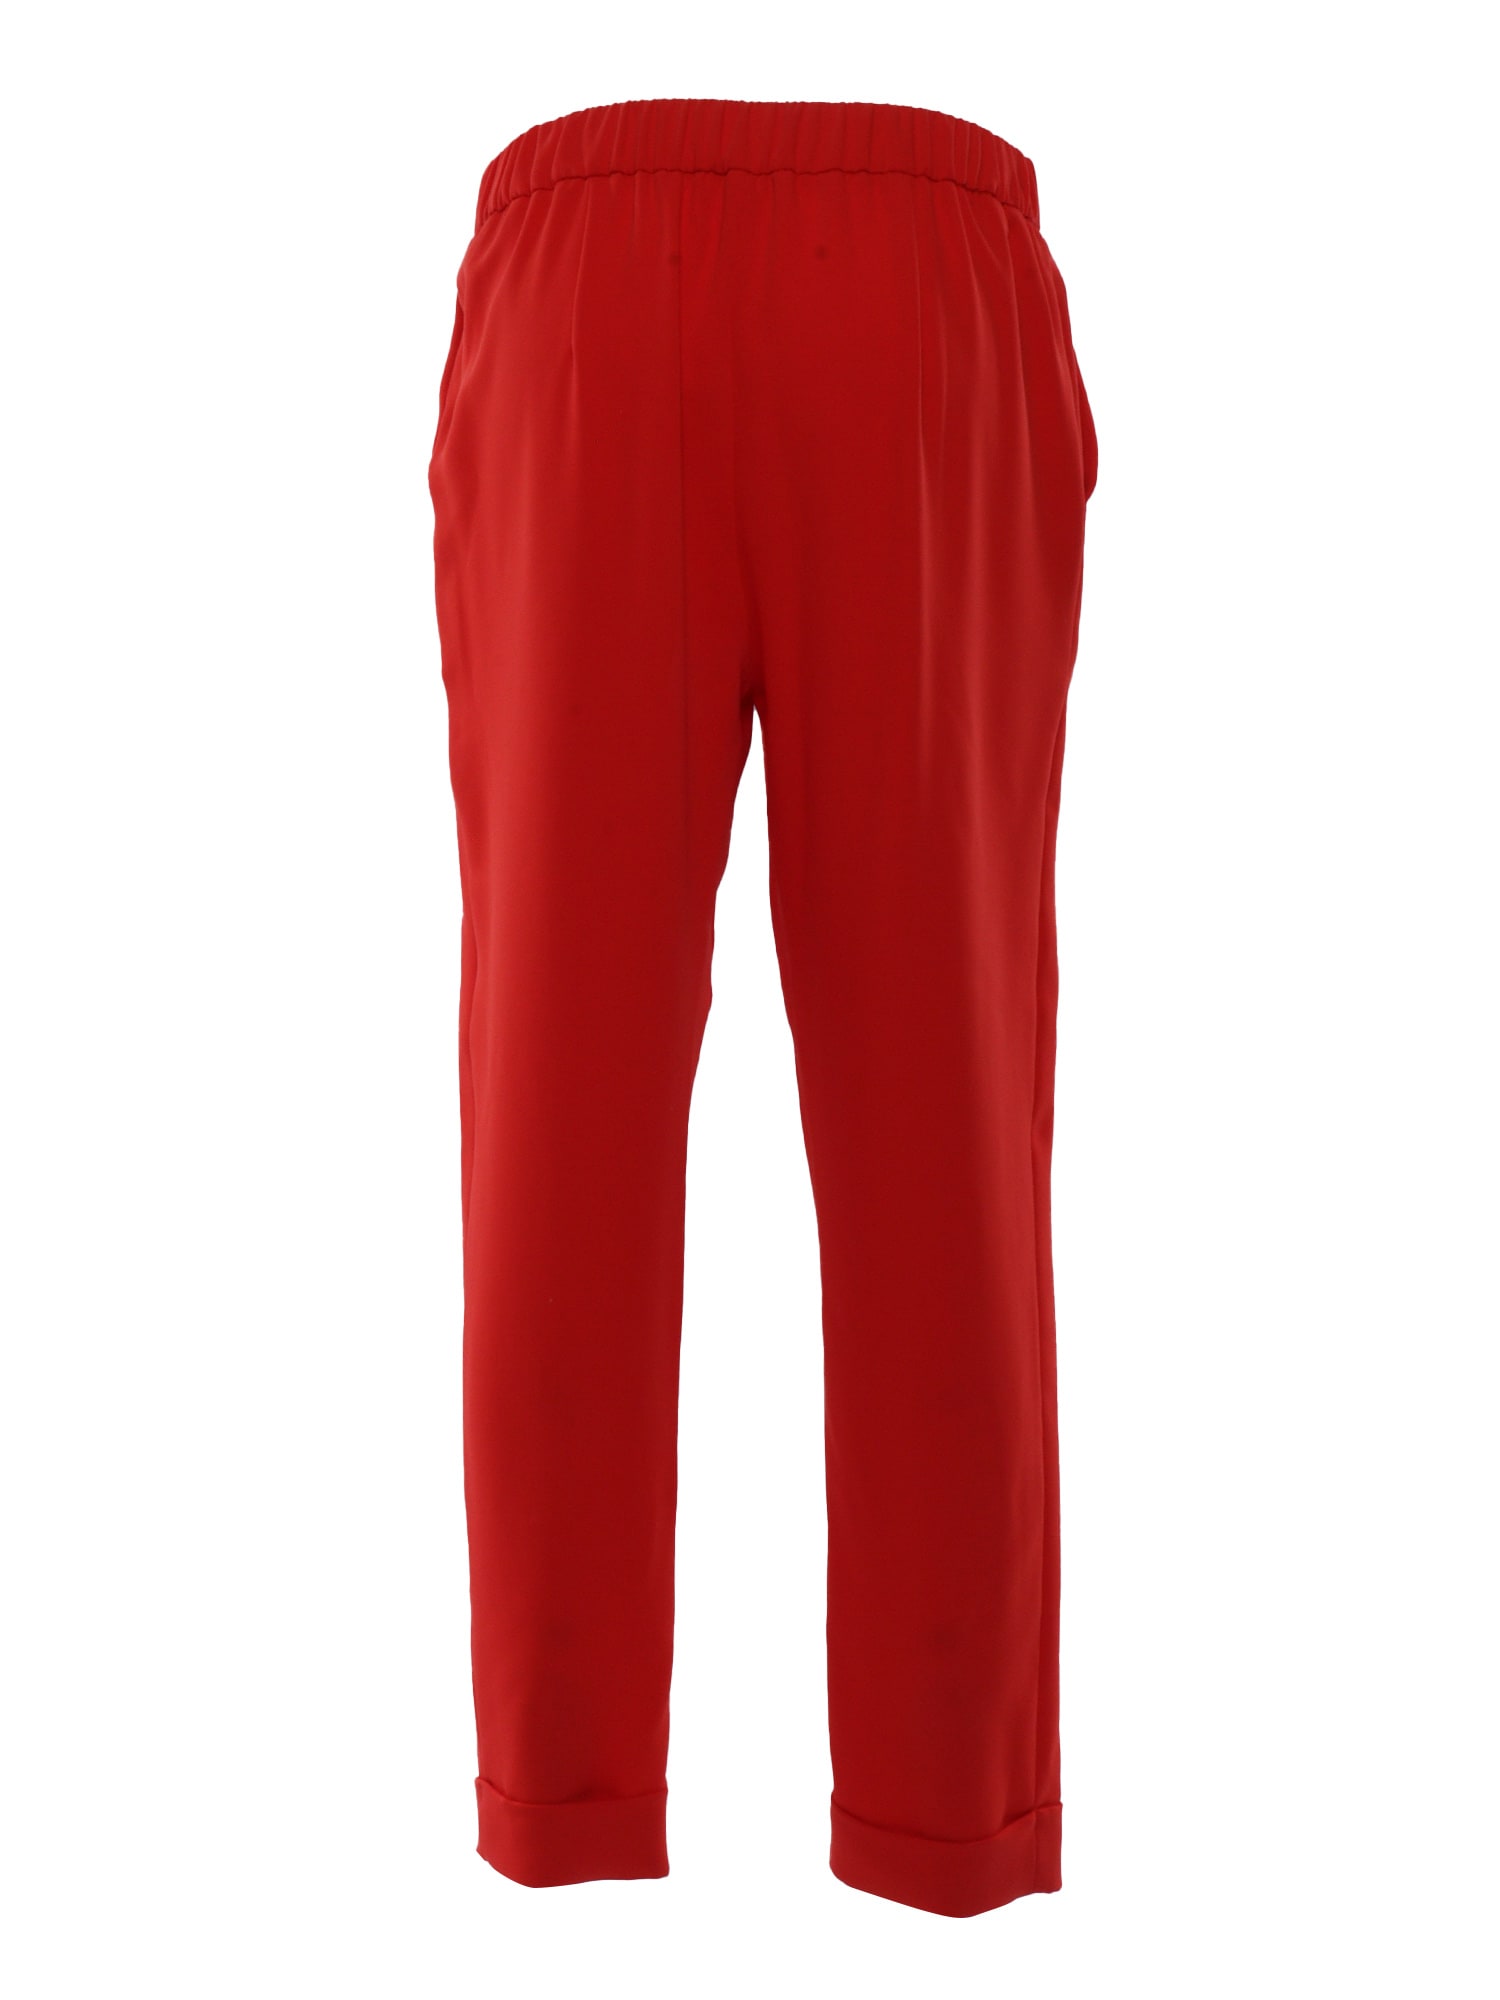 Shop P.a.r.o.s.h Red Trousers